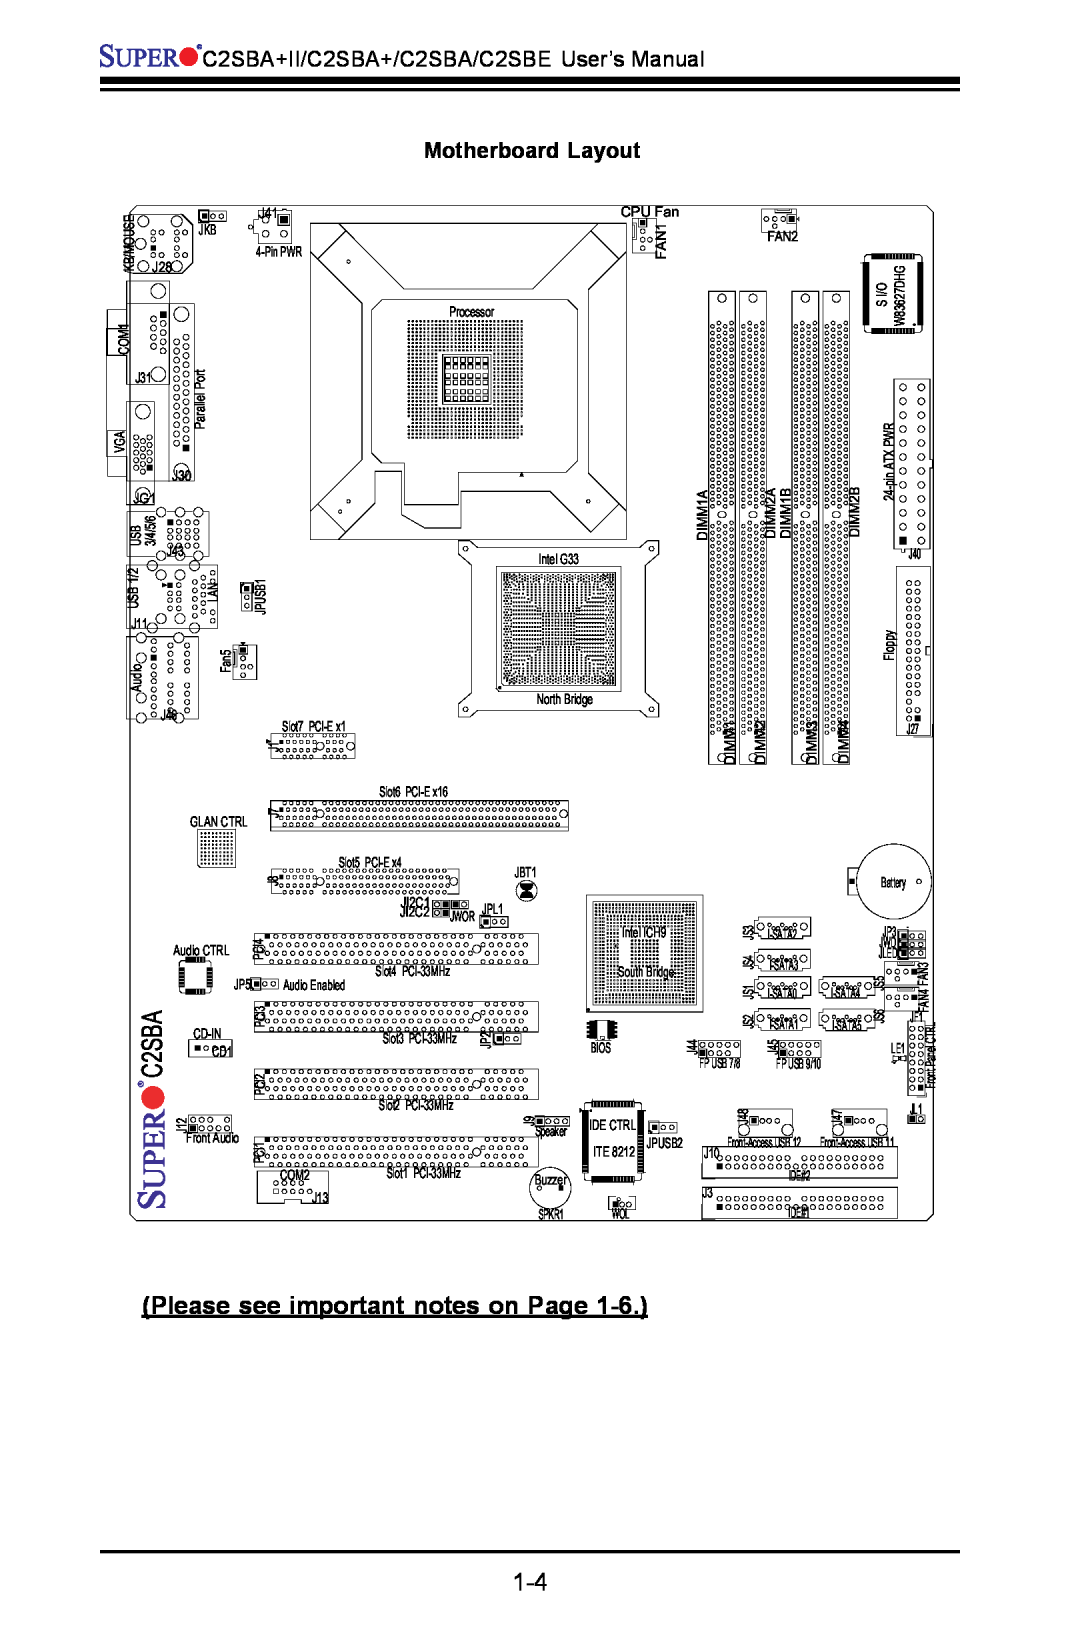 SUPER MICRO Computer C2SBA+II, C2SBE user manual Please see important notes on Page, Motherboard Layout 